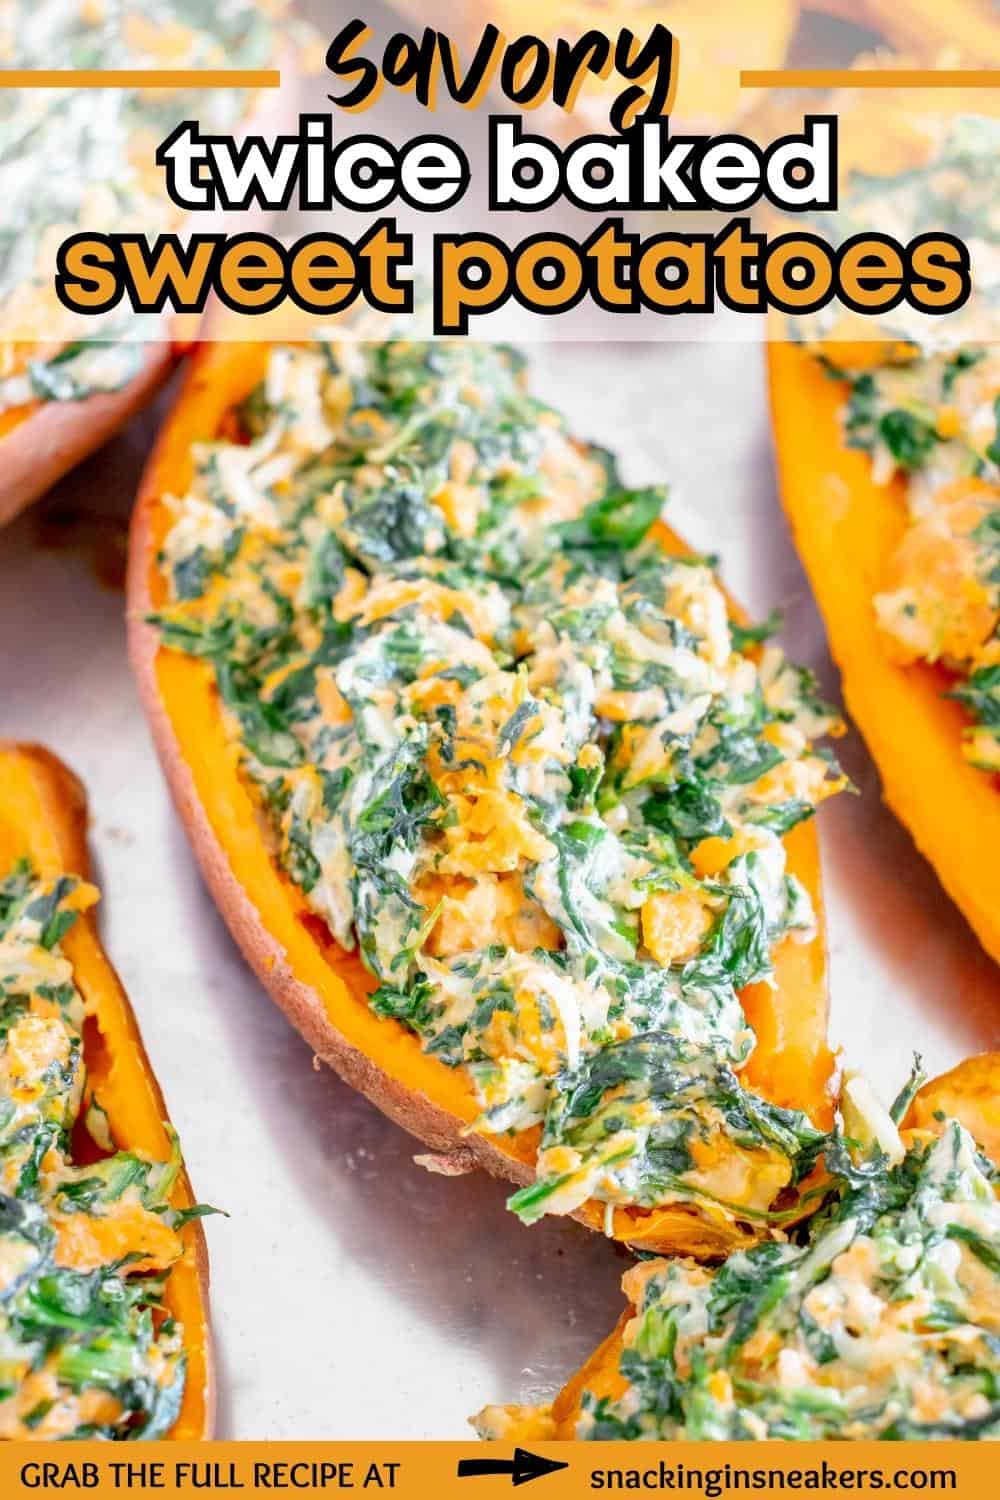 A close-up of a savory twice baked sweet potato on a baking sheet, with a text overlay with the name of the recipe.